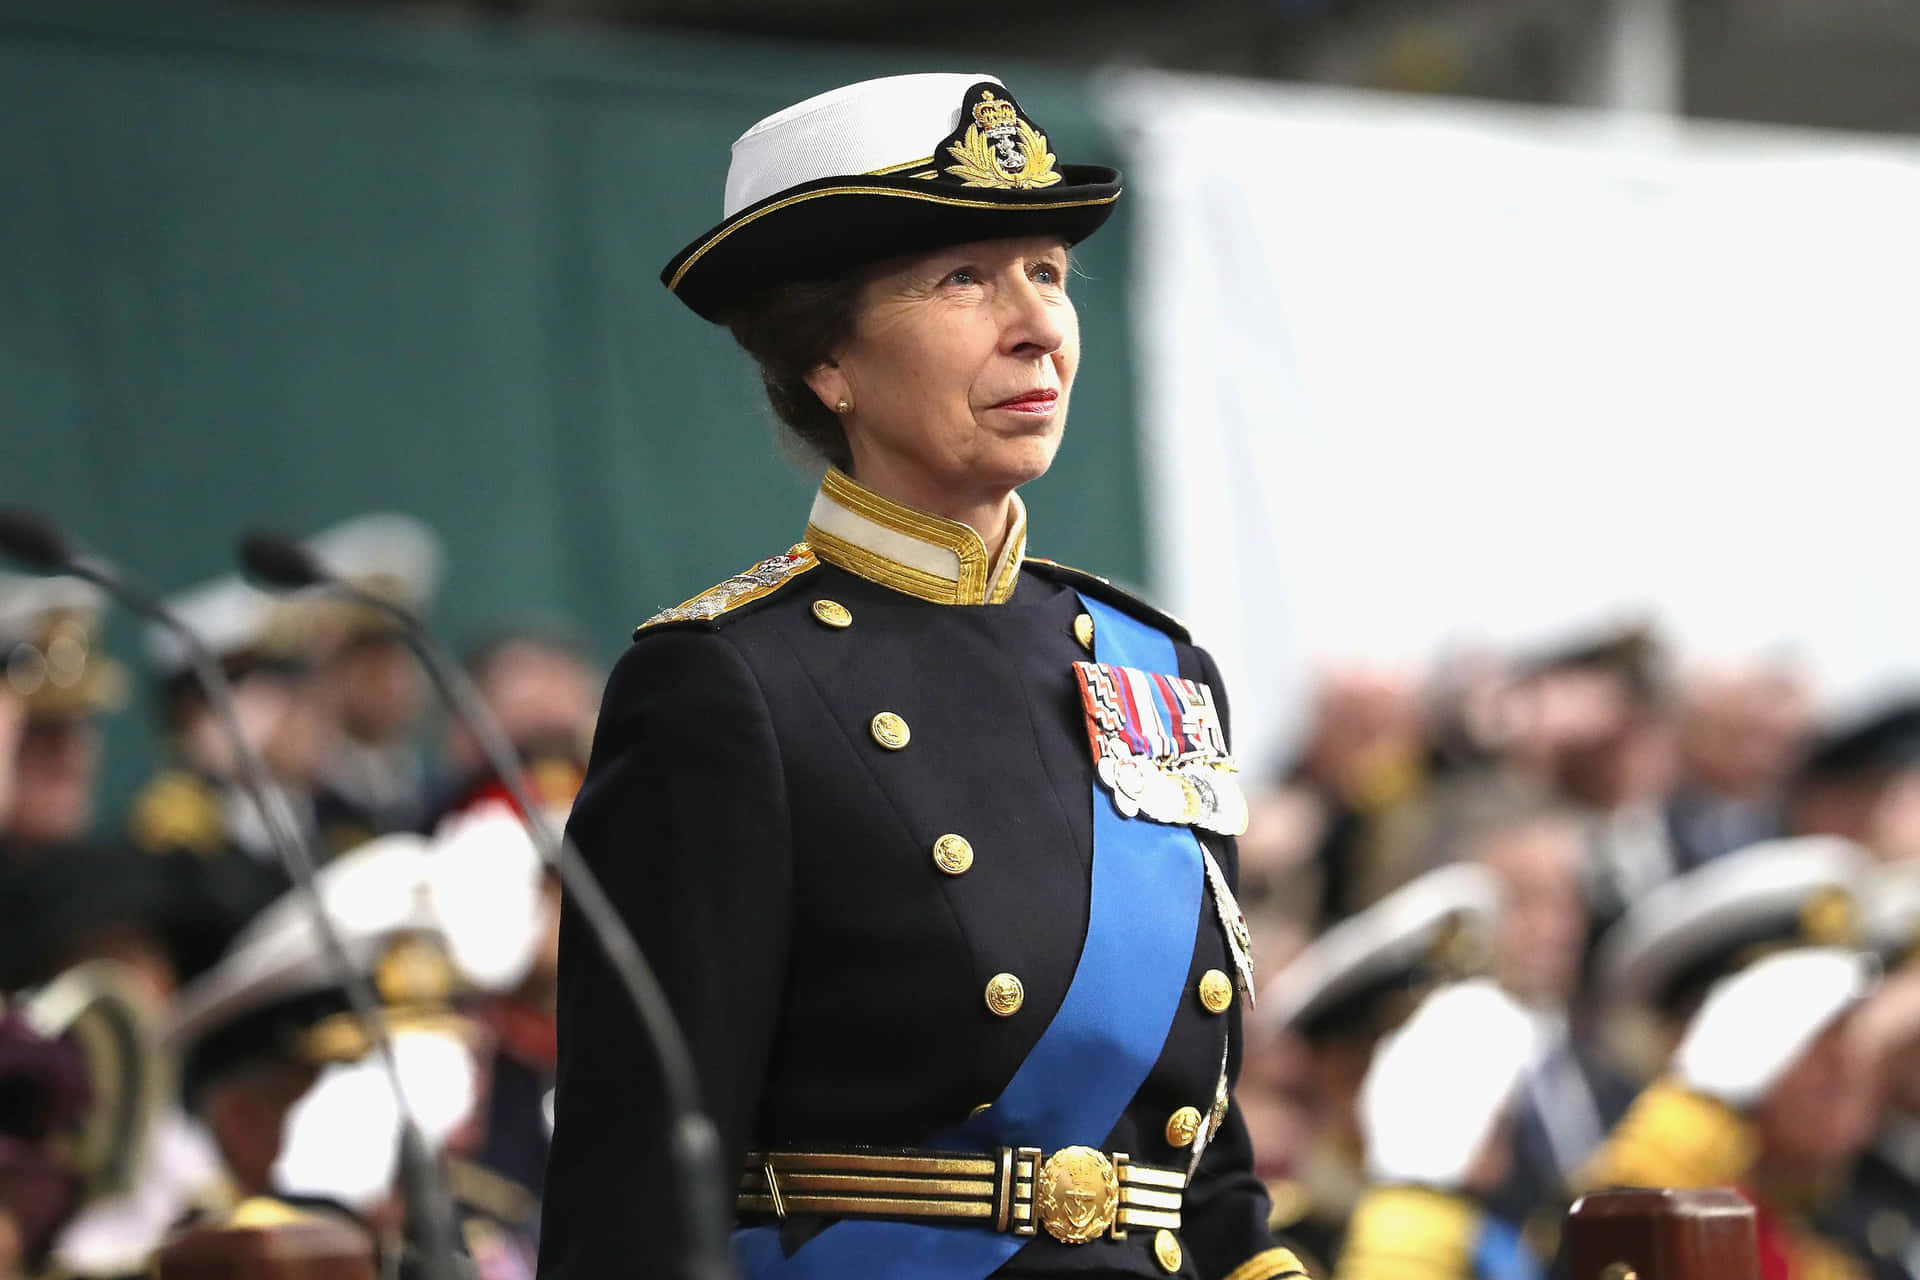 Princess Anne adorned in Royal Military Suit Wallpaper